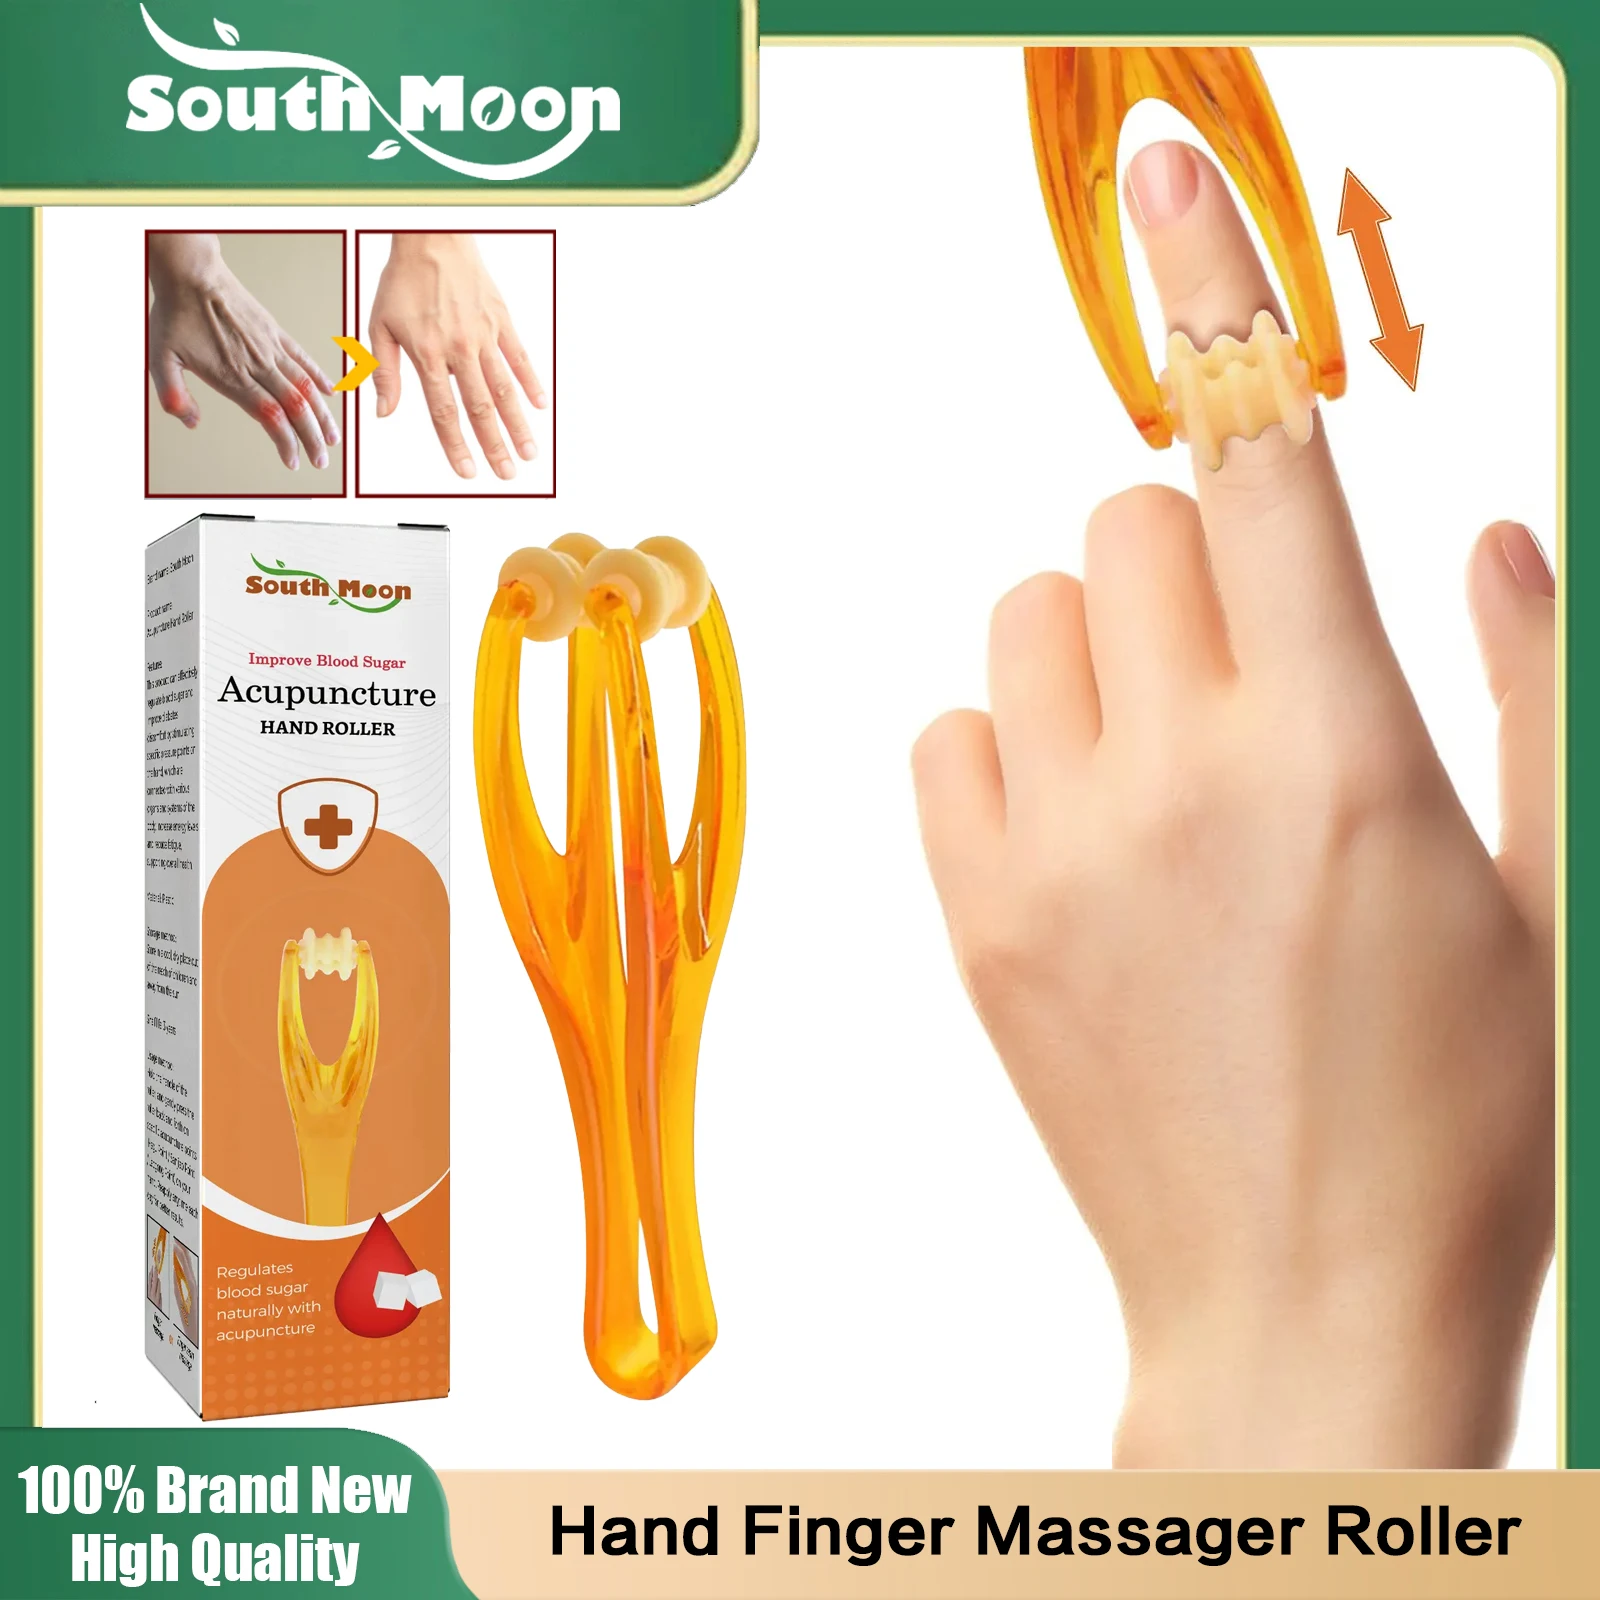 

Hand Massage Roller Finger Joint Acupoint Scraper Control Blood Sugar Relief Hand Fatigue Sore Blood Circulation Relaxation Tool